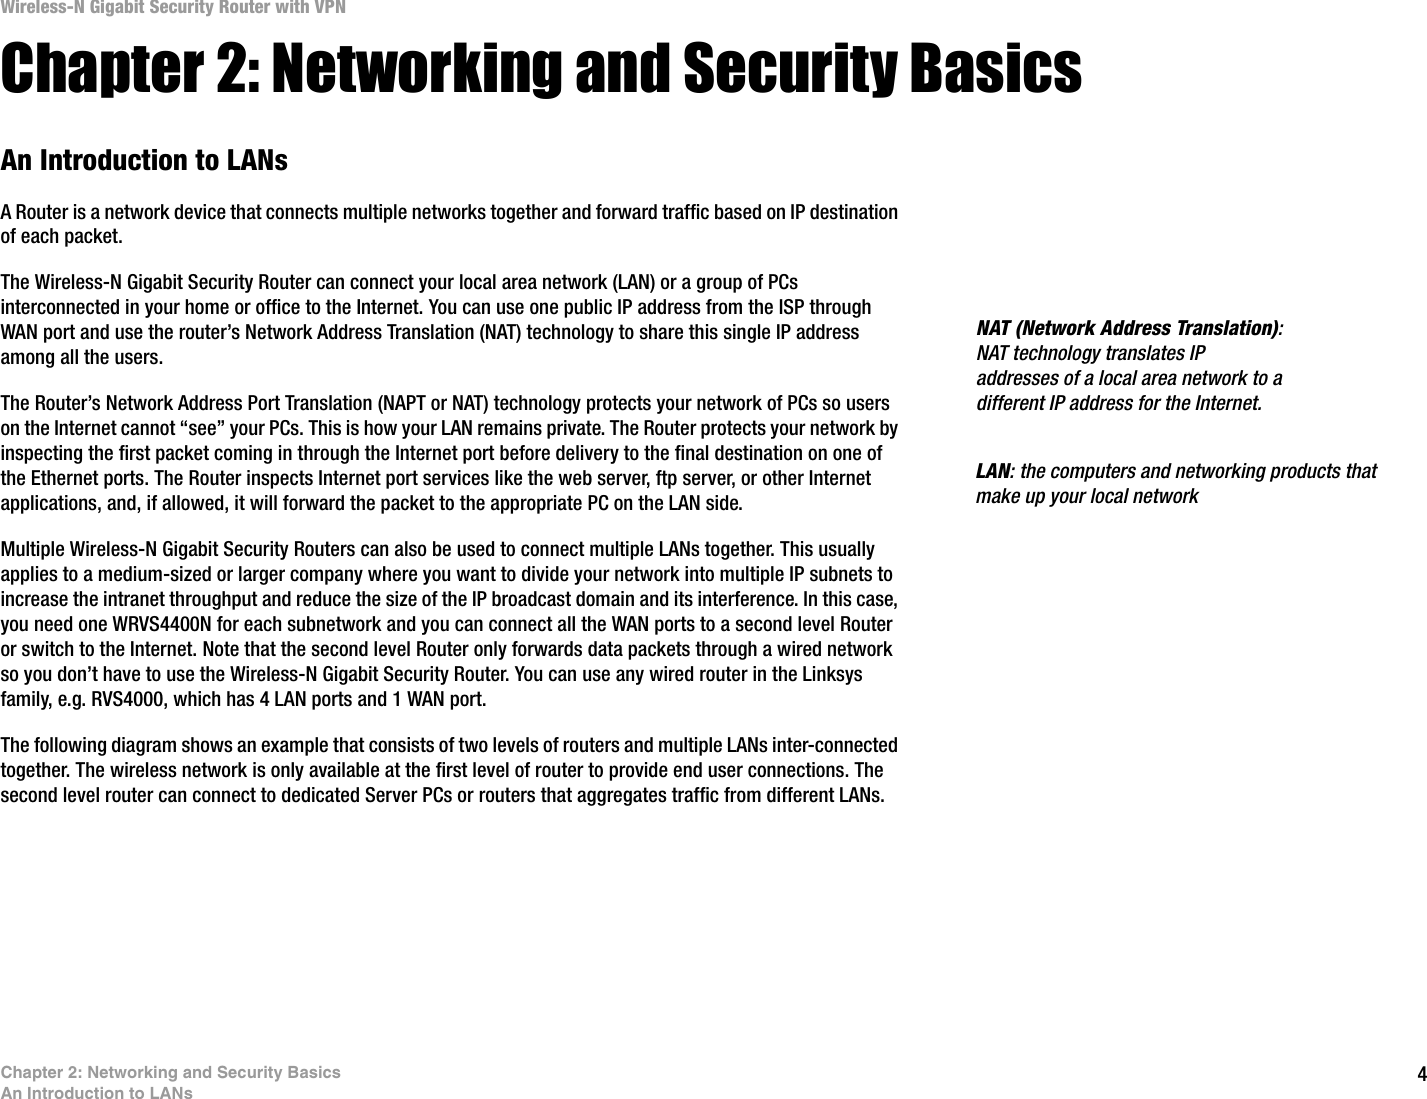 4Chapter 2: Networking and Security BasicsAn Introduction to LANsWireless-N Gigabit Security Router with VPNChapter 2: Networking and Security BasicsAn Introduction to LANsA Router is a network device that connects multiple networks together and forward traffic based on IP destination of each packet.The Wireless-N Gigabit Security Router can connect your local area network (LAN) or a group of PCs interconnected in your home or office to the Internet. You can use one public IP address from the ISP through WAN port and use the router’s Network Address Translation (NAT) technology to share this single IP address among all the users. The Router’s Network Address Port Translation (NAPT or NAT) technology protects your network of PCs so users on the Internet cannot “see” your PCs. This is how your LAN remains private. The Router protects your network by inspecting the first packet coming in through the Internet port before delivery to the final destination on one of the Ethernet ports. The Router inspects Internet port services like the web server, ftp server, or other Internet applications, and, if allowed, it will forward the packet to the appropriate PC on the LAN side. Multiple Wireless-N Gigabit Security Routers can also be used to connect multiple LANs together. This usually applies to a medium-sized or larger company where you want to divide your network into multiple IP subnets to increase the intranet throughput and reduce the size of the IP broadcast domain and its interference. In this case, you need one WRVS4400N for each subnetwork and you can connect all the WAN ports to a second level Router or switch to the Internet. Note that the second level Router only forwards data packets through a wired network so you don’t have to use the Wireless-N Gigabit Security Router. You can use any wired router in the Linksys family, e.g. RVS4000, which has 4 LAN ports and 1 WAN port. The following diagram shows an example that consists of two levels of routers and multiple LANs inter-connected together. The wireless network is only available at the first level of router to provide end user connections. The second level router can connect to dedicated Server PCs or routers that aggregates traffic from different LANs. NAT (Network Address Translation): NAT technology translates IP addresses of a local area network to a different IP address for the Internet. LAN: the computers and networking products that make up your local network